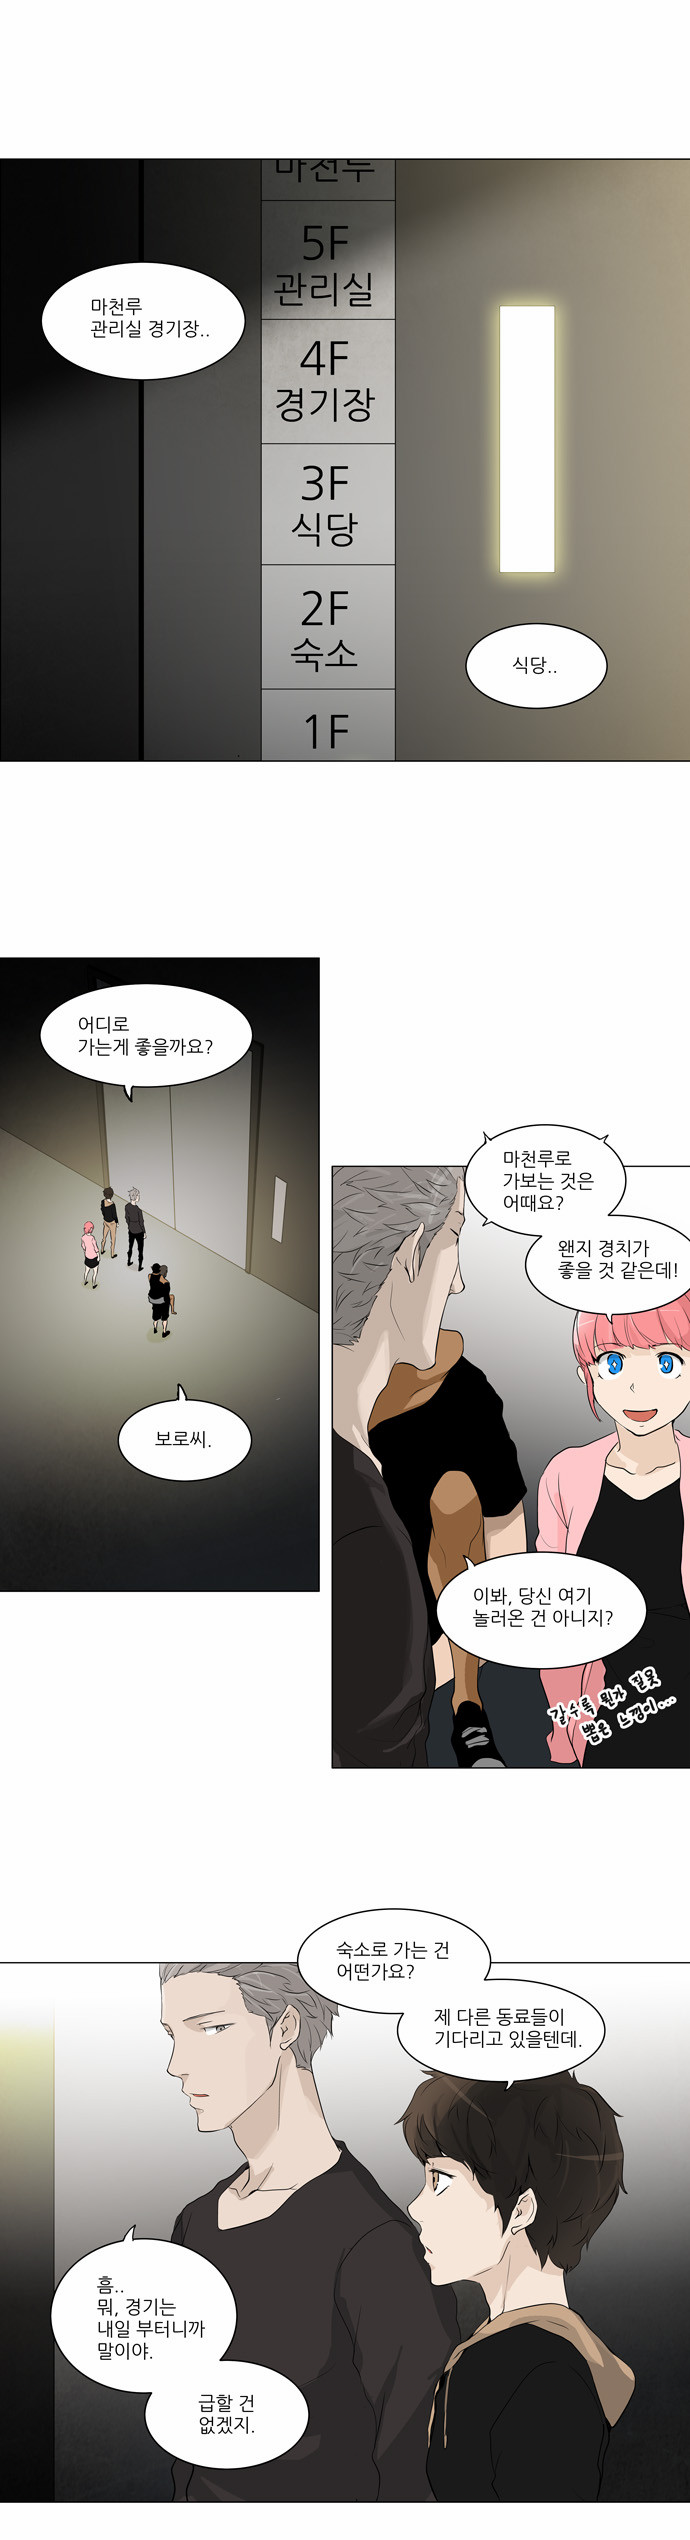 Tower of God - Chapter 202 - Page 1